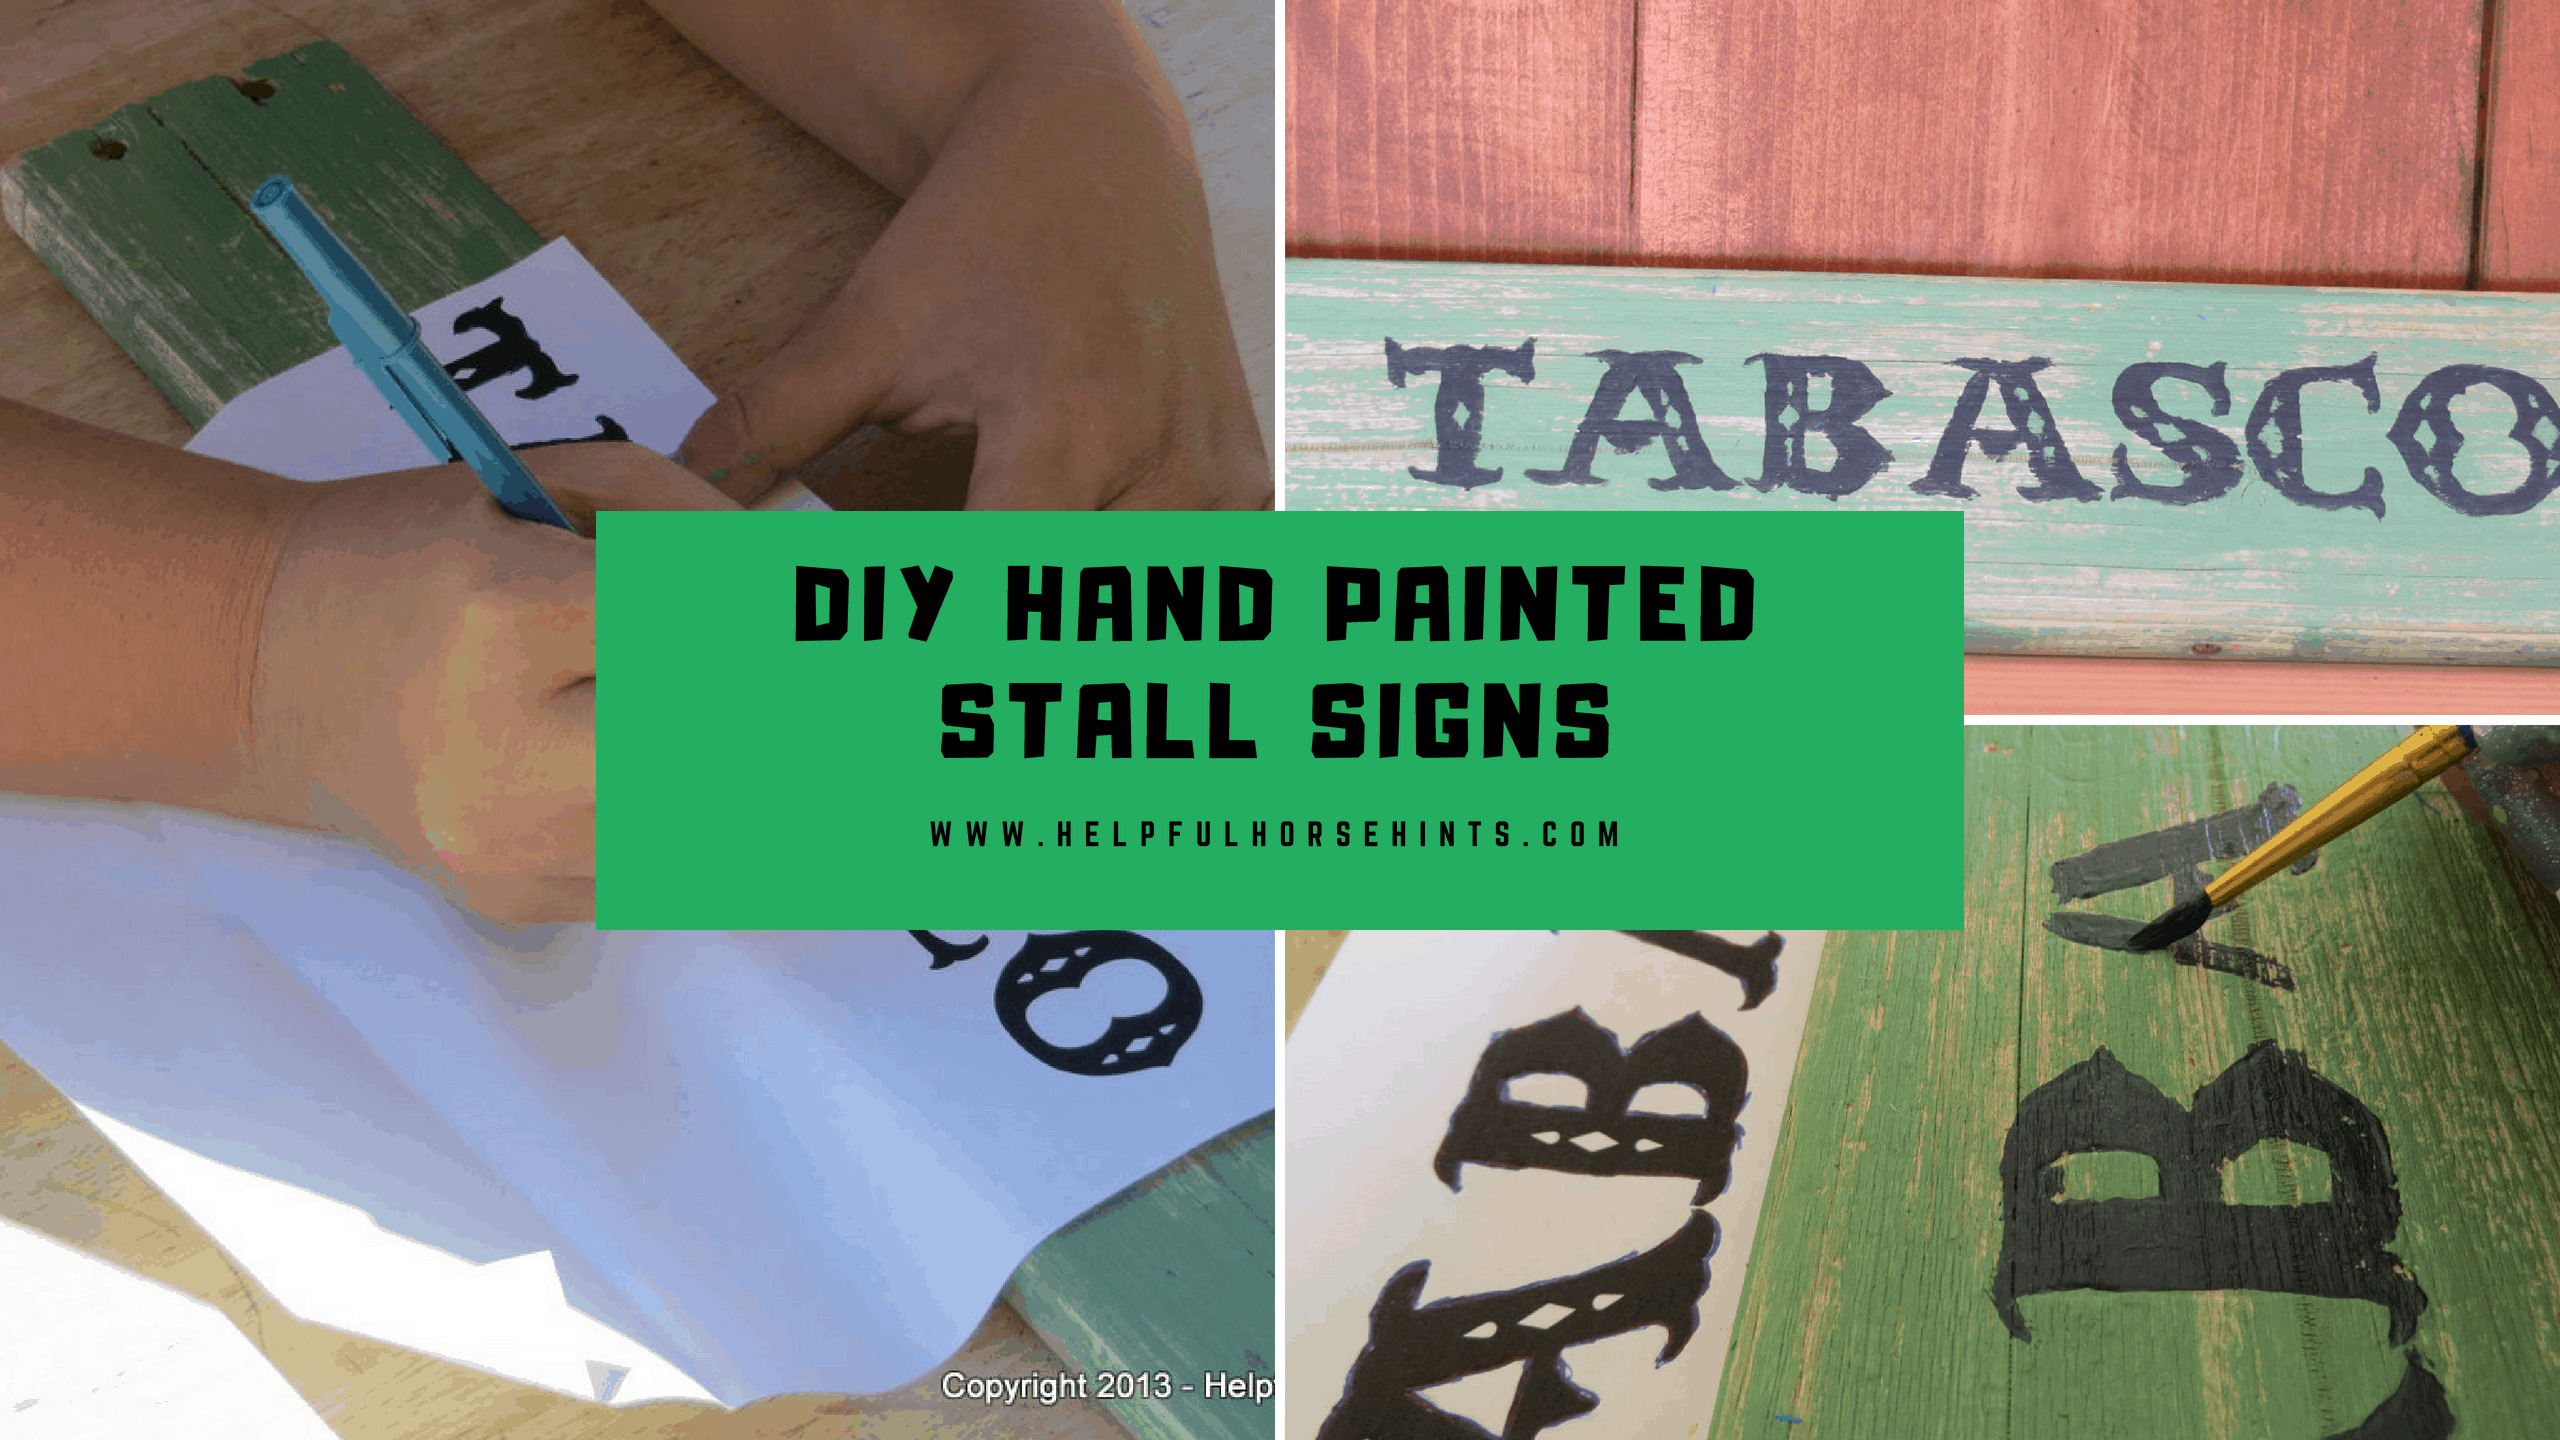 DIY Hand Painted Stall Signs